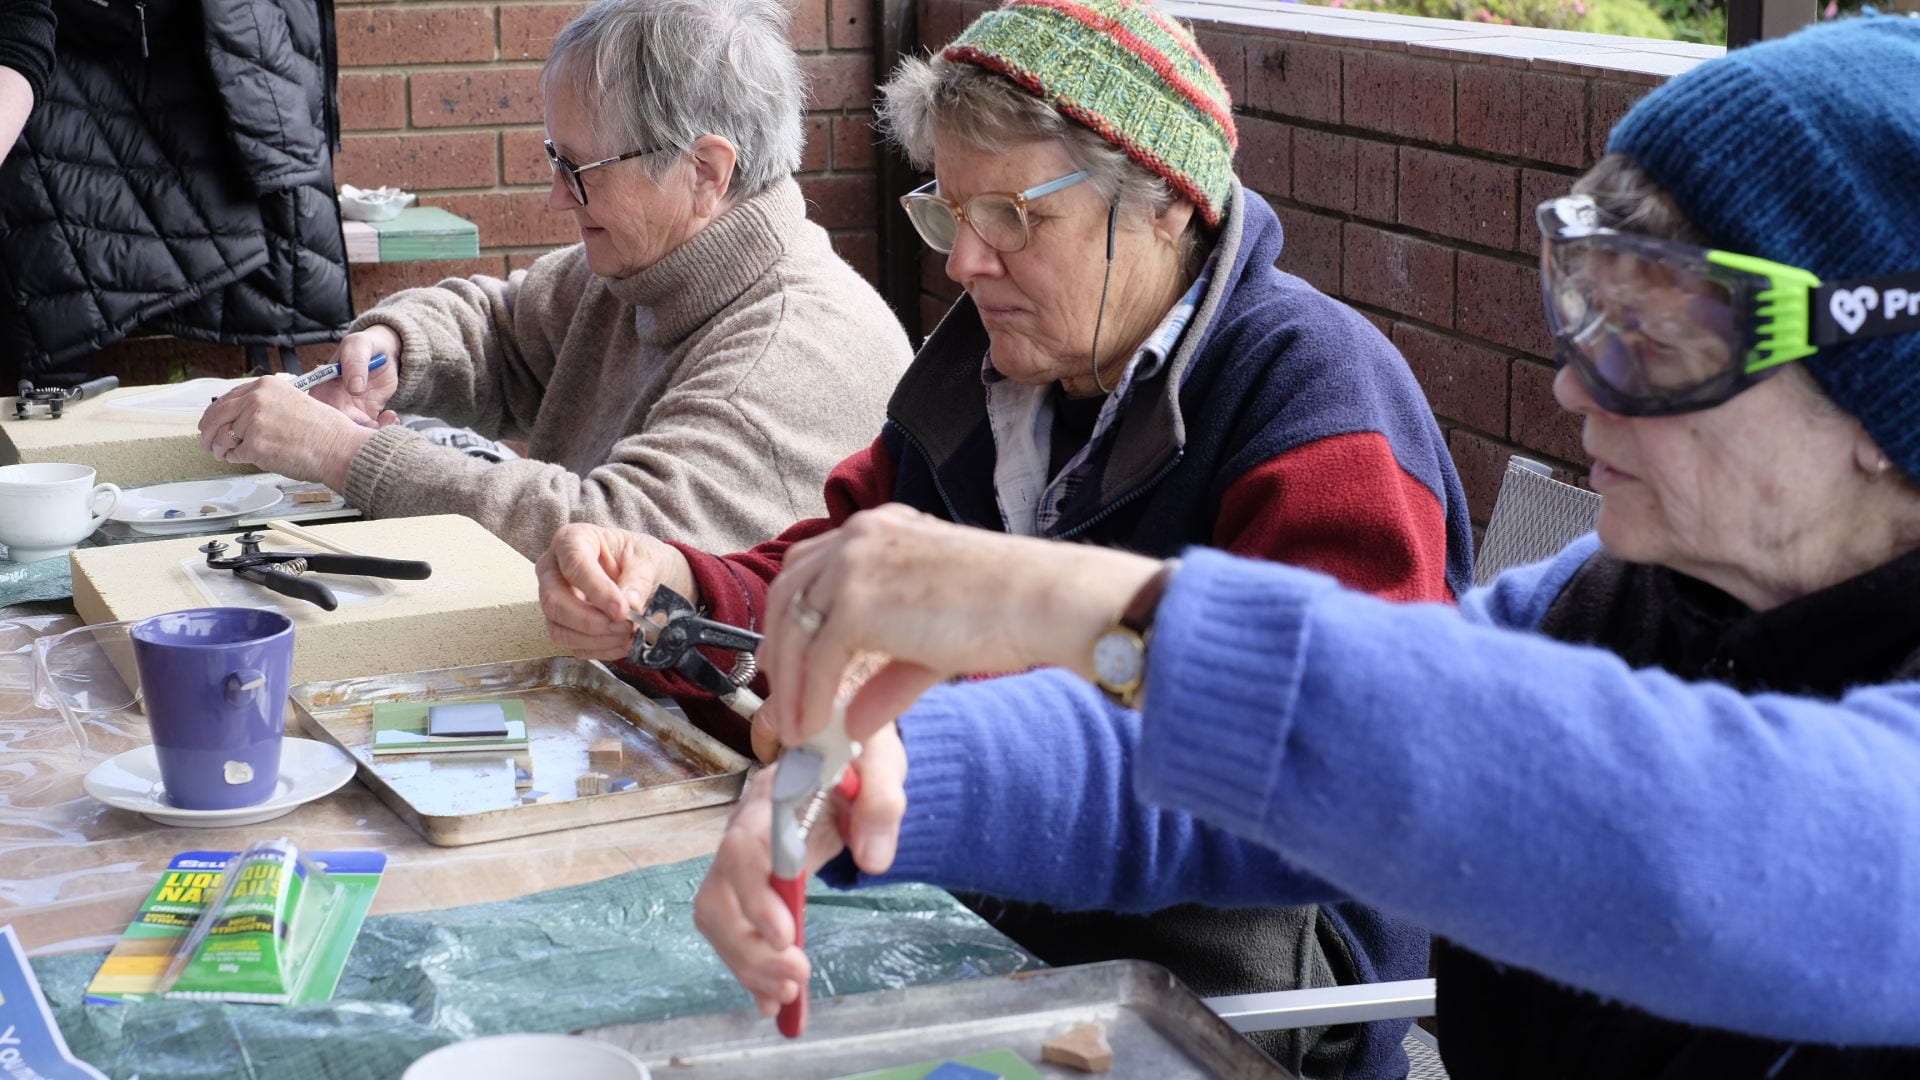 Three older woman sit at a table cutting tiles with tools for a mosaic. They wear glasses and goggles.